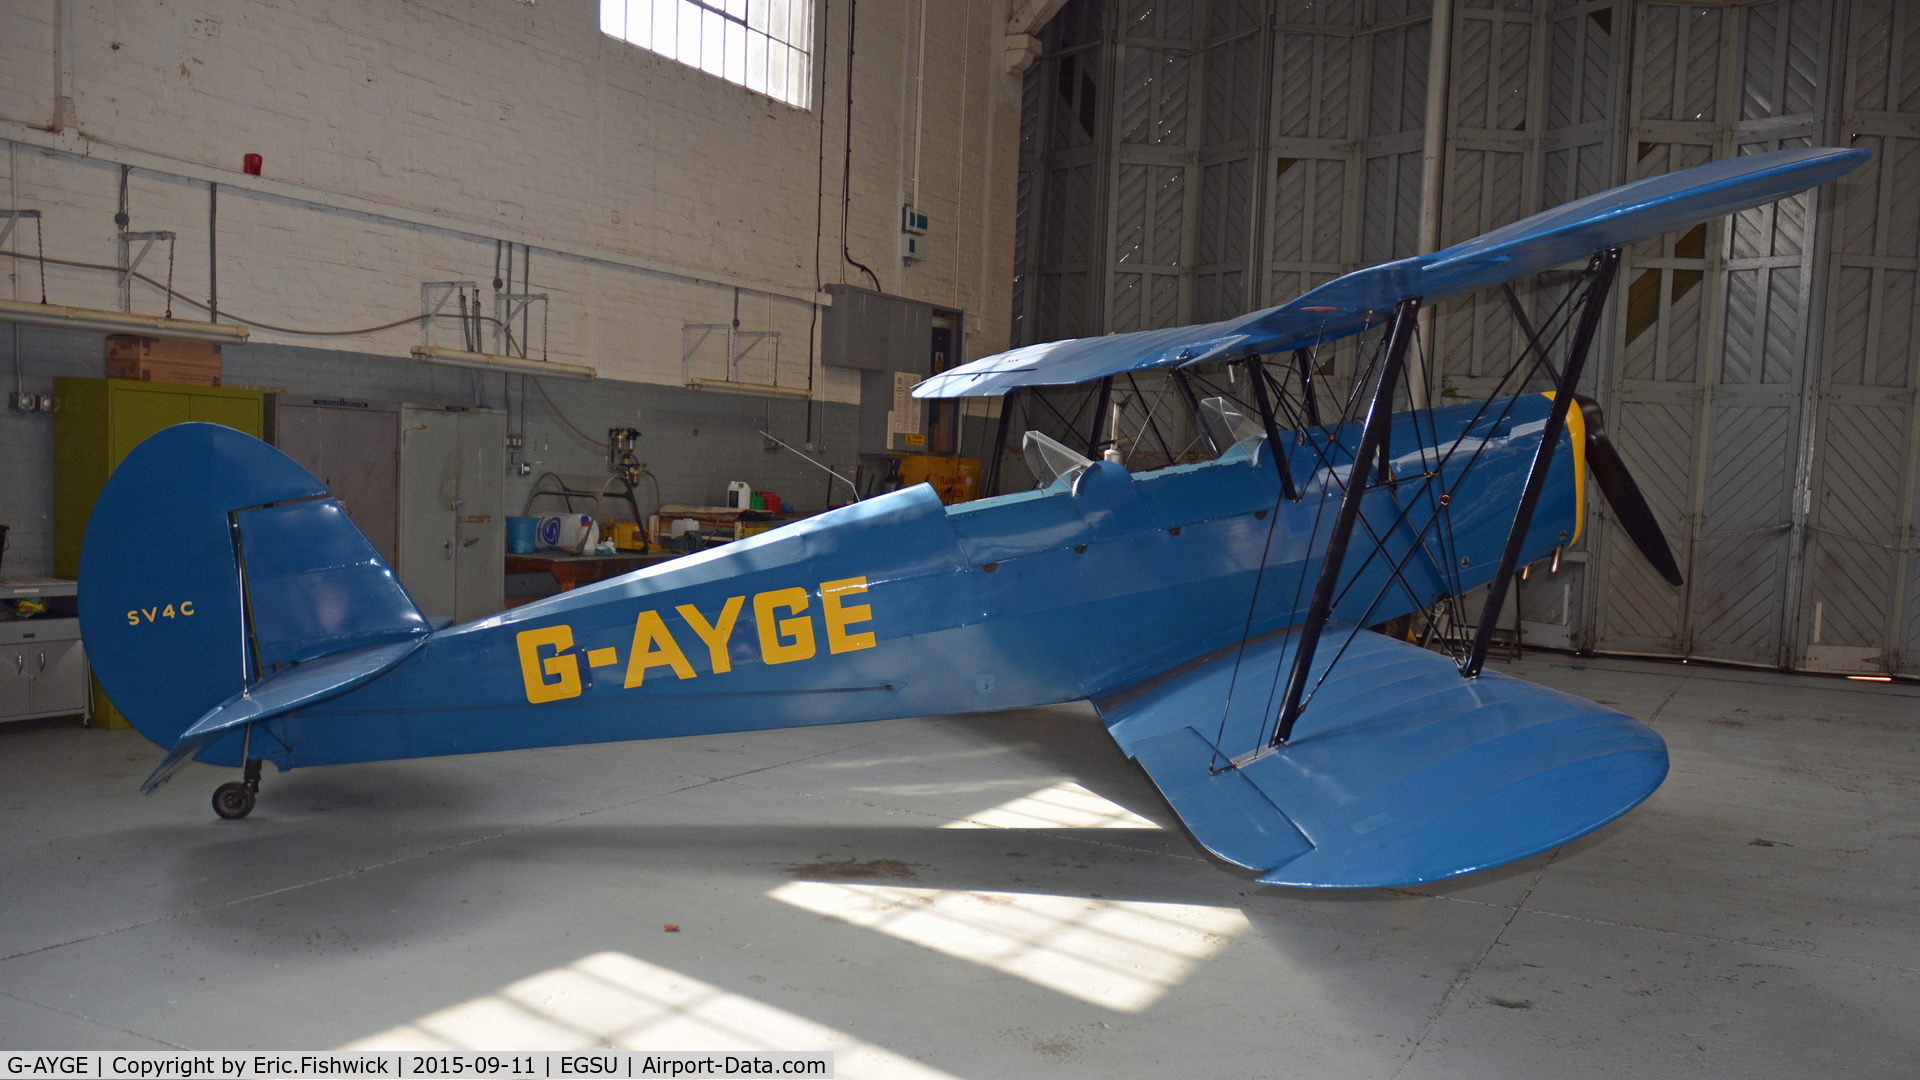 G-AYGE, 1946 Stampe-Vertongen SV-4C C/N 242, 2. G-AYGE at The Imperial War Museum, Duxford, Cambridgeshire.